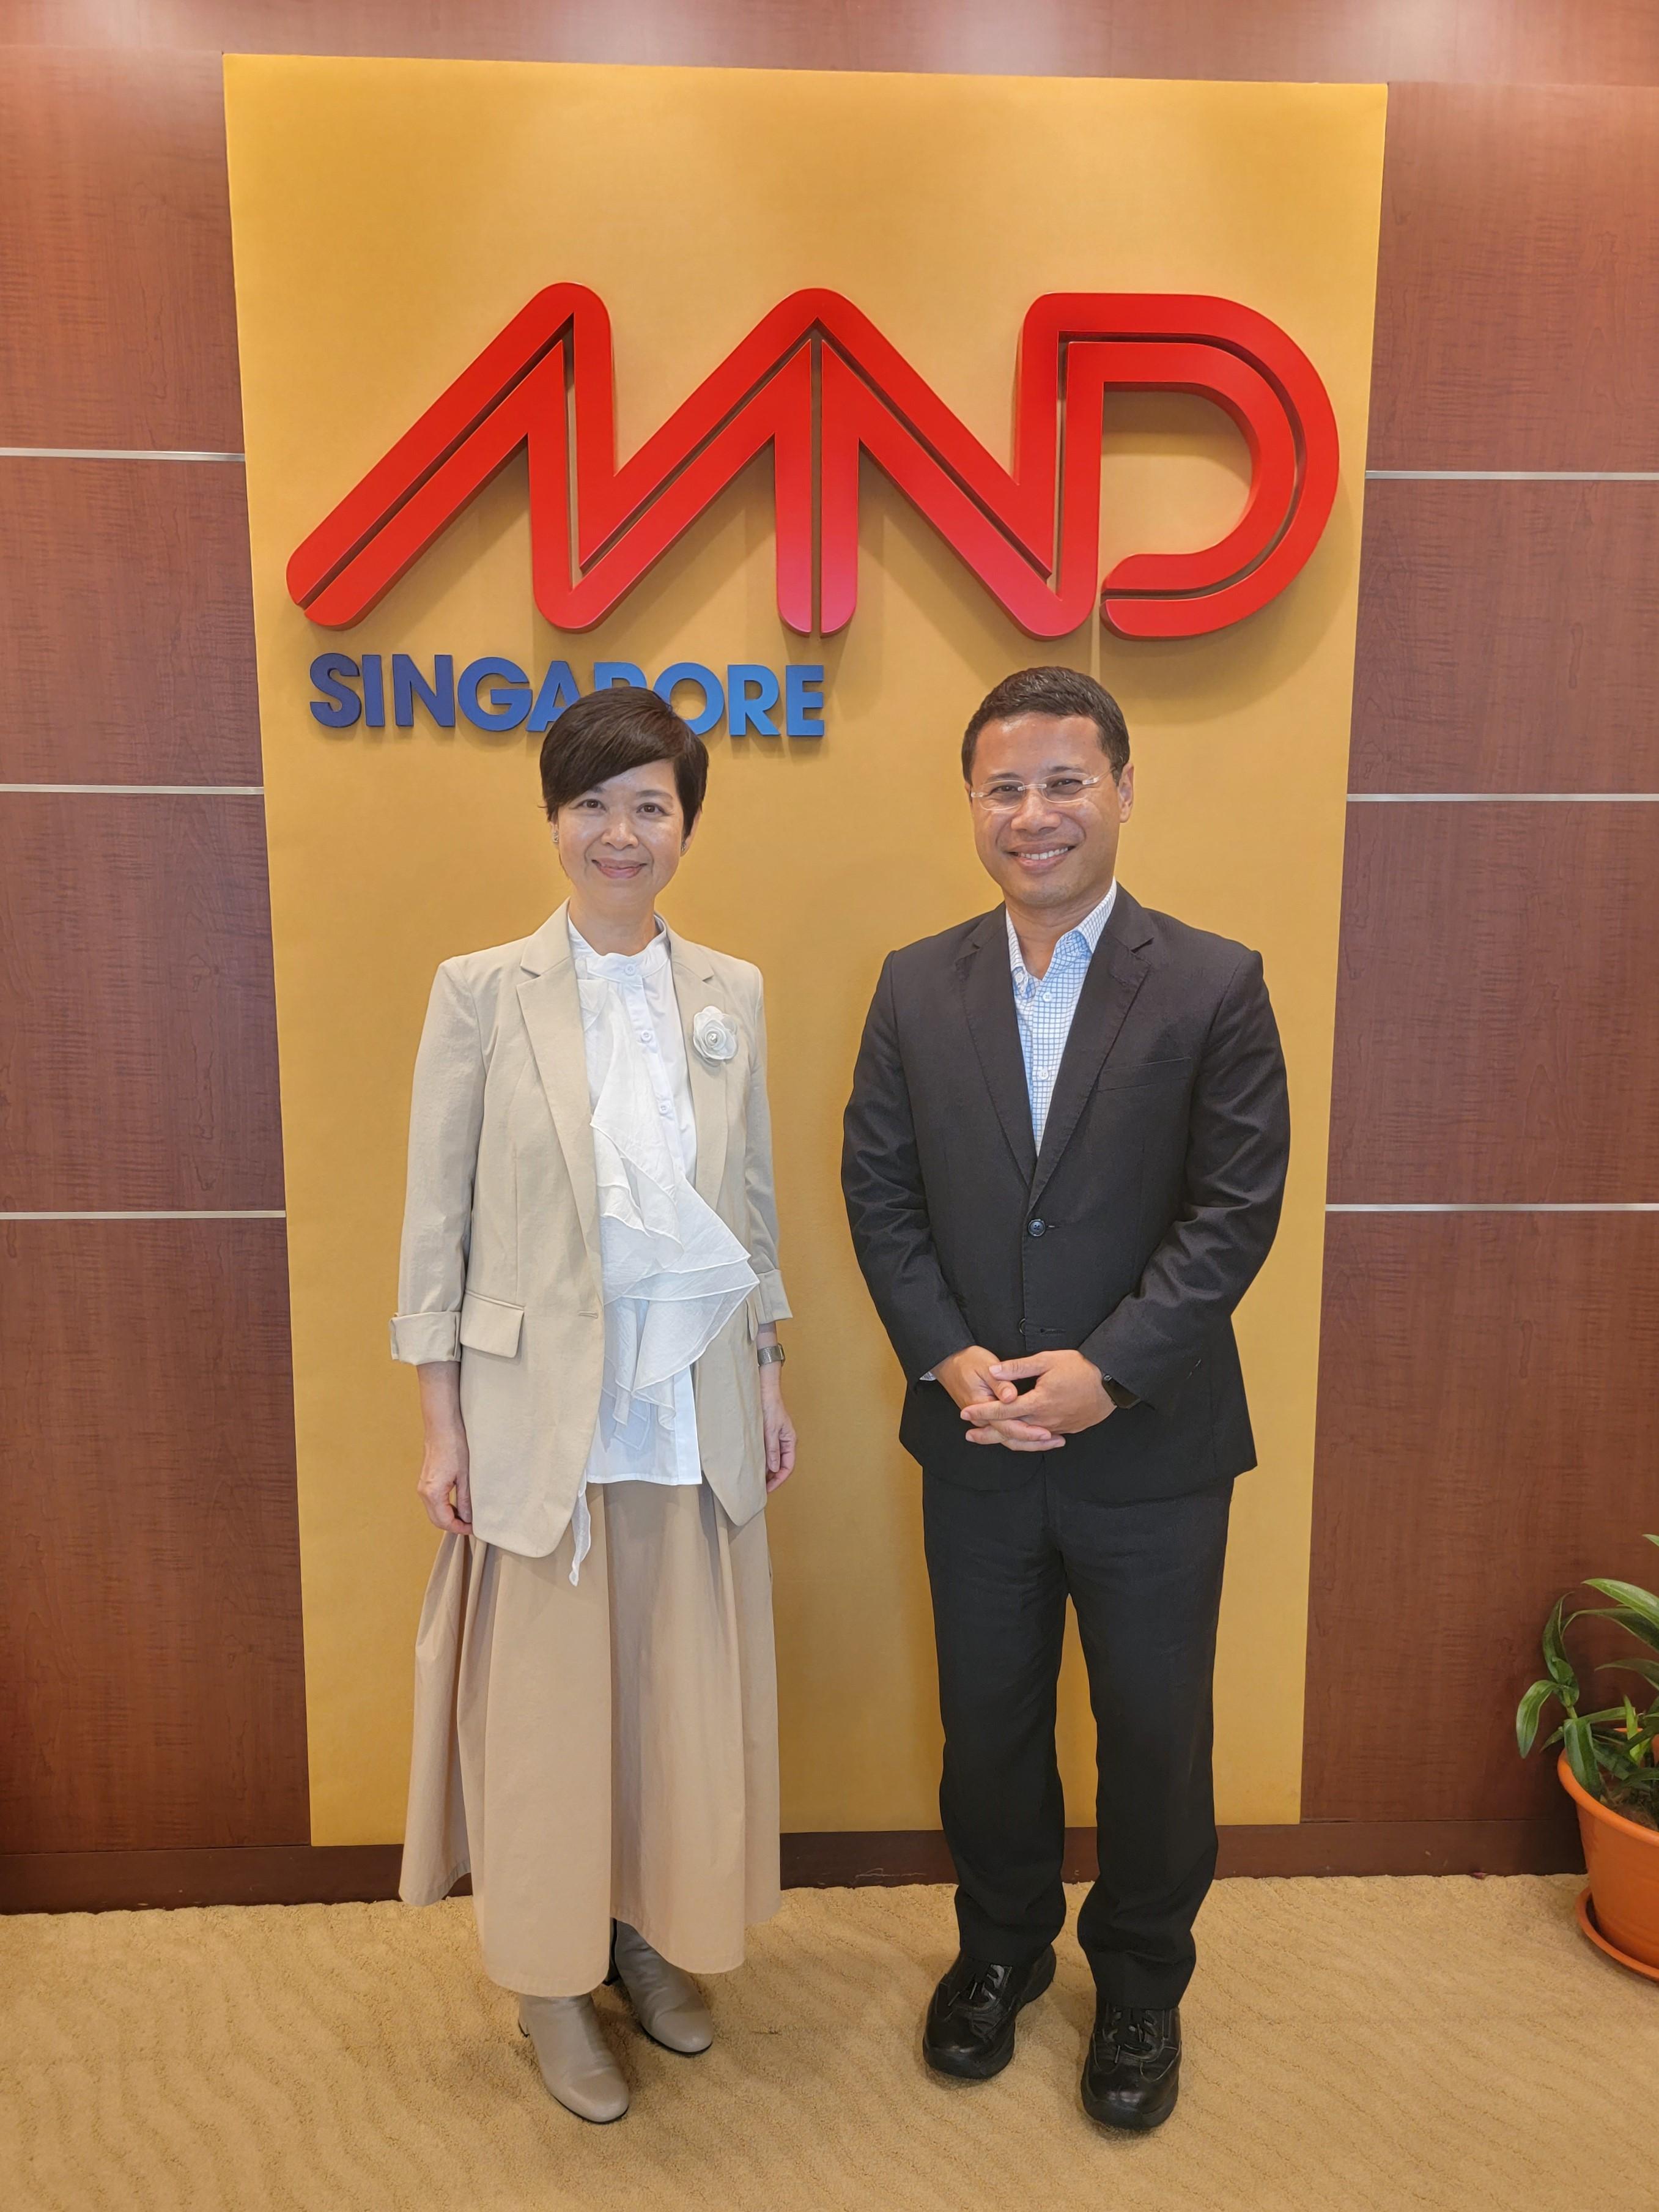 The Secretary for Housing, Ms Winnie Ho, began her visit to Singapore yesterday (August 22). She met with local government officials to exchange views in areas such as housing policies, innovative construction technologies and green building. Photo shows Ms Ho (left) meeting the Minister for National Development of Singapore, Mr Desmond Lee (right), yesterday.